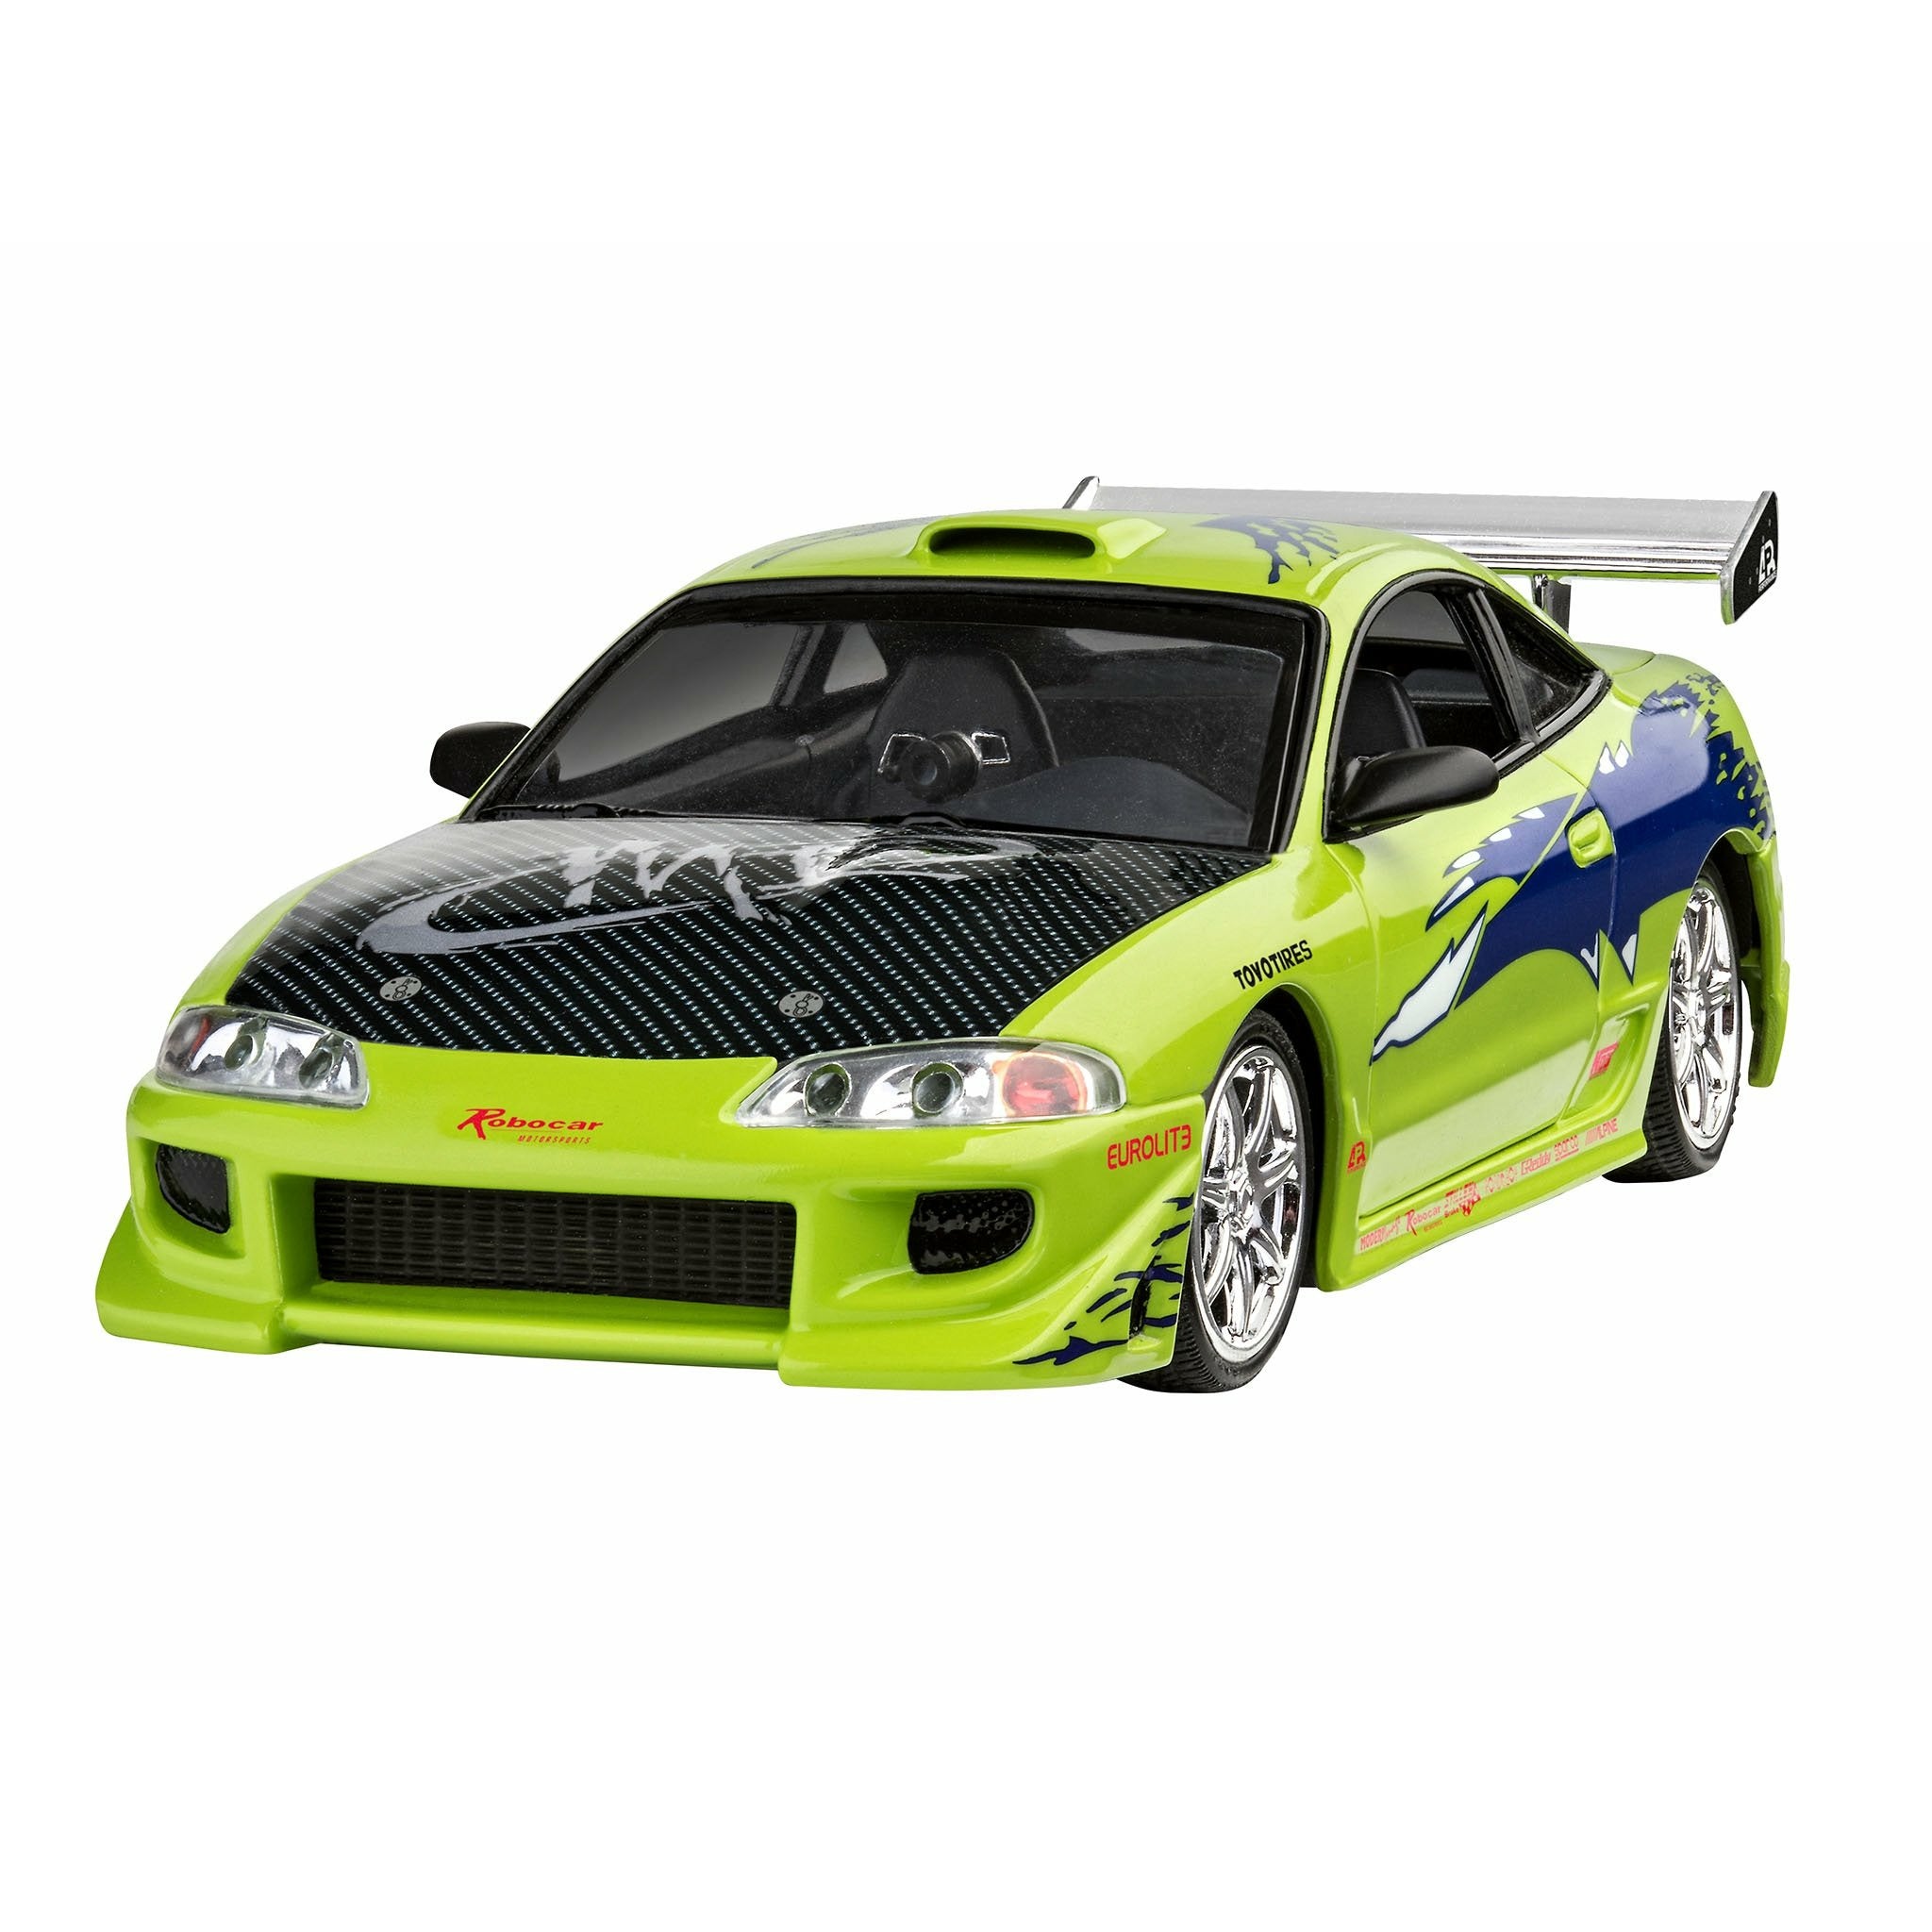 1995 Brian's Mitsubishi Eclipse 1/25 Model Car Kit #07691 by Revell